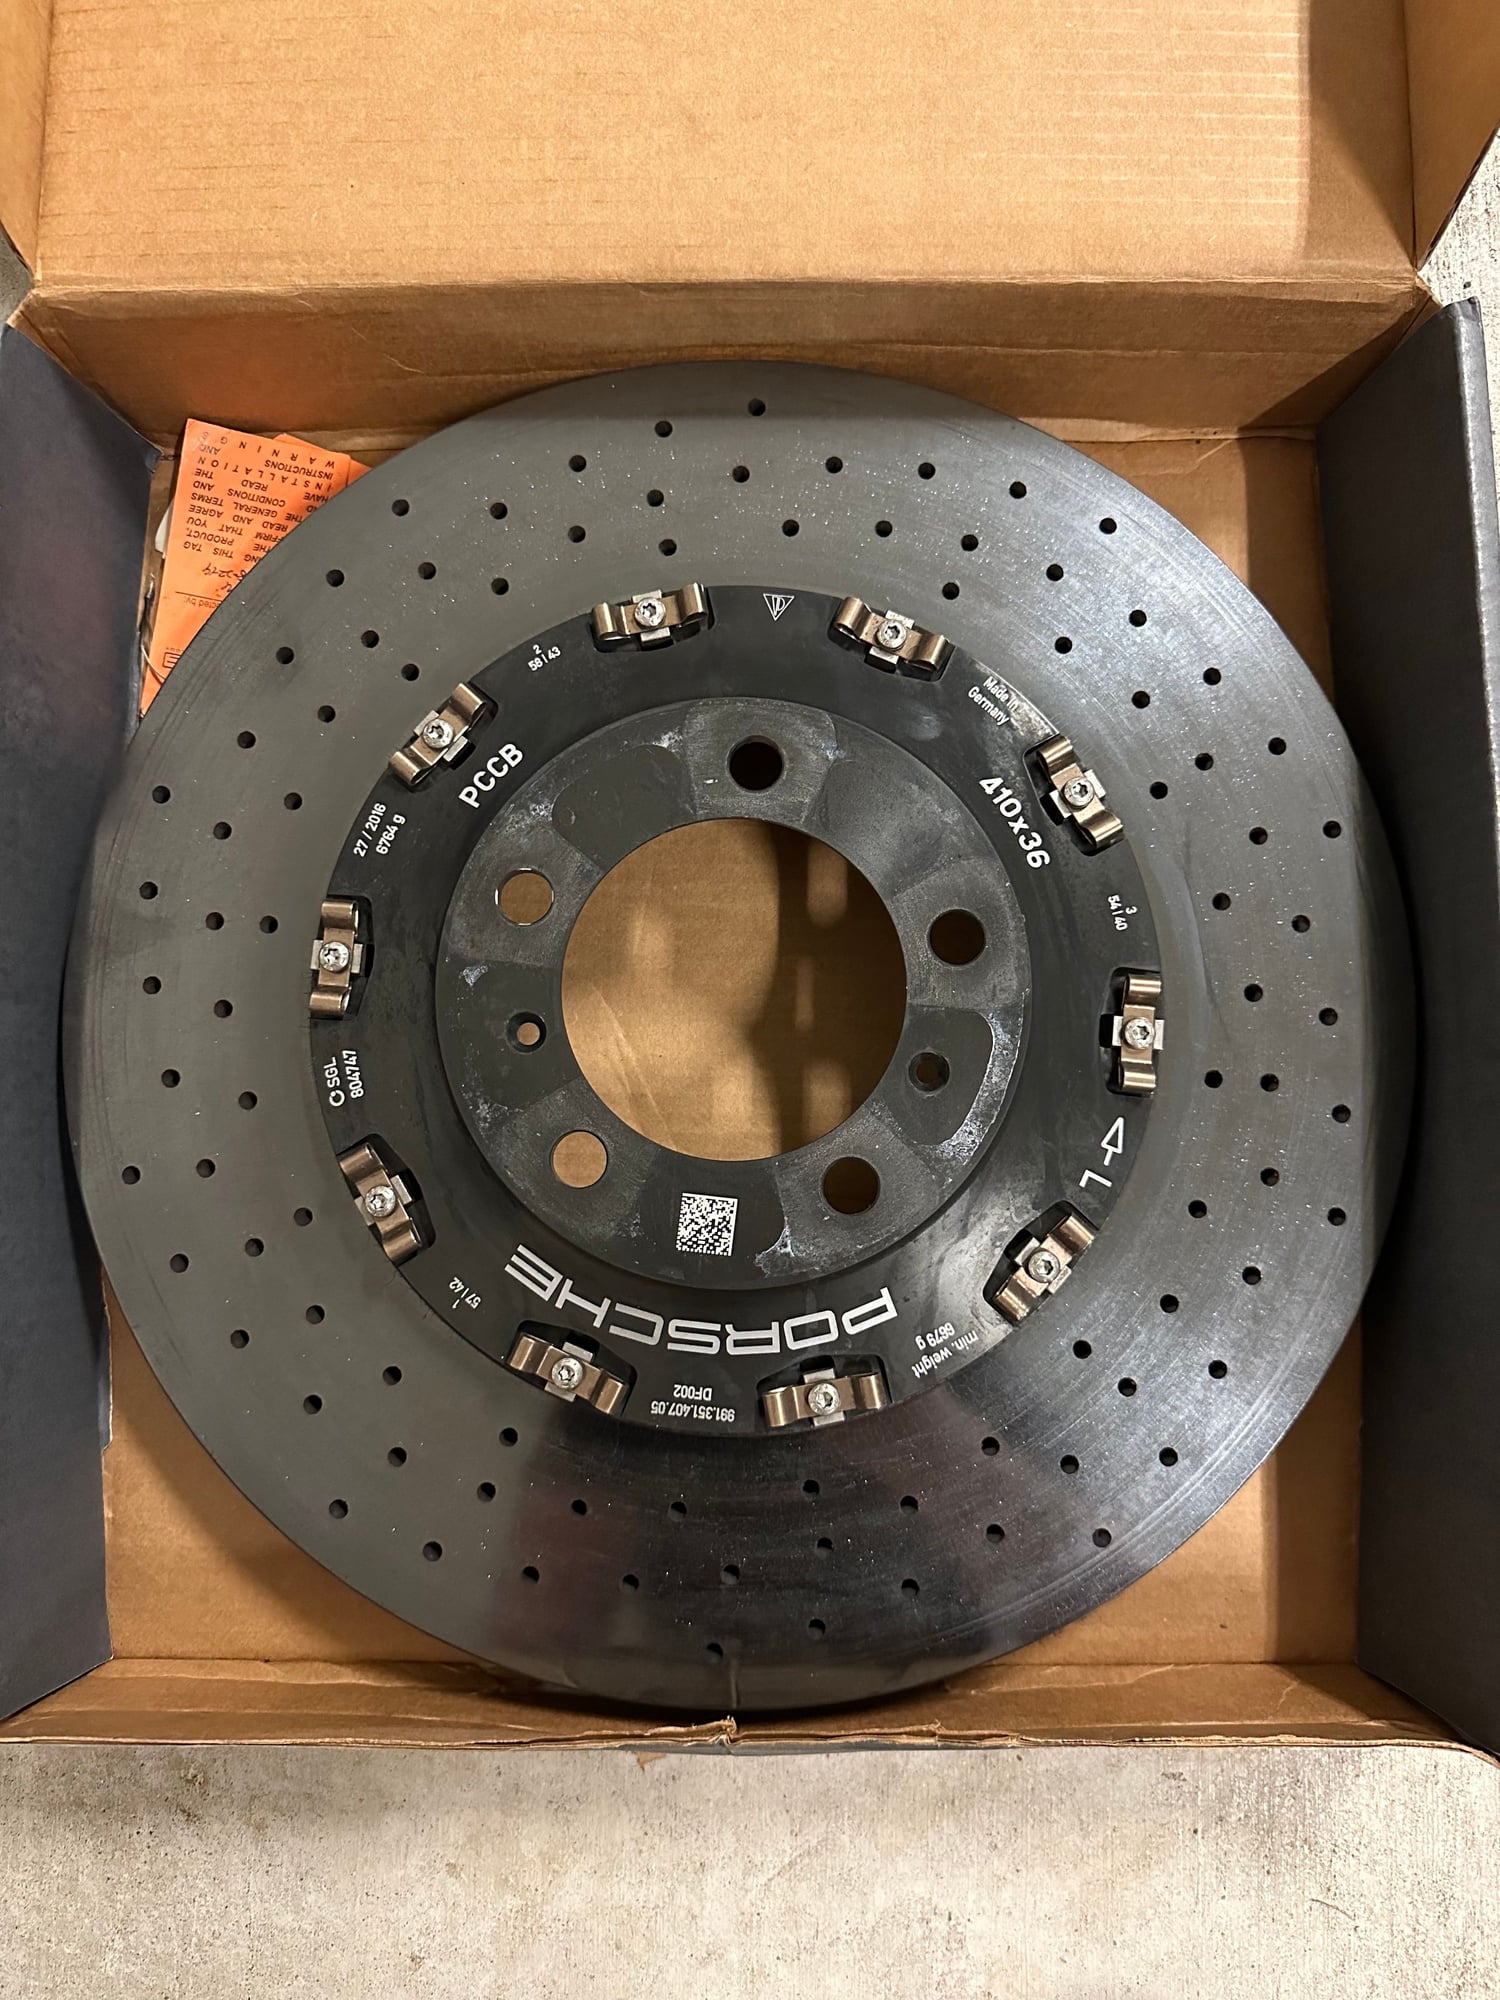 Brakes - 2016 GT4 PCCB Rotors and Pads (410mmx36 and 390x32) - Used - 2016 Porsche Cayman GT4 - Austin, TX 78641, United States